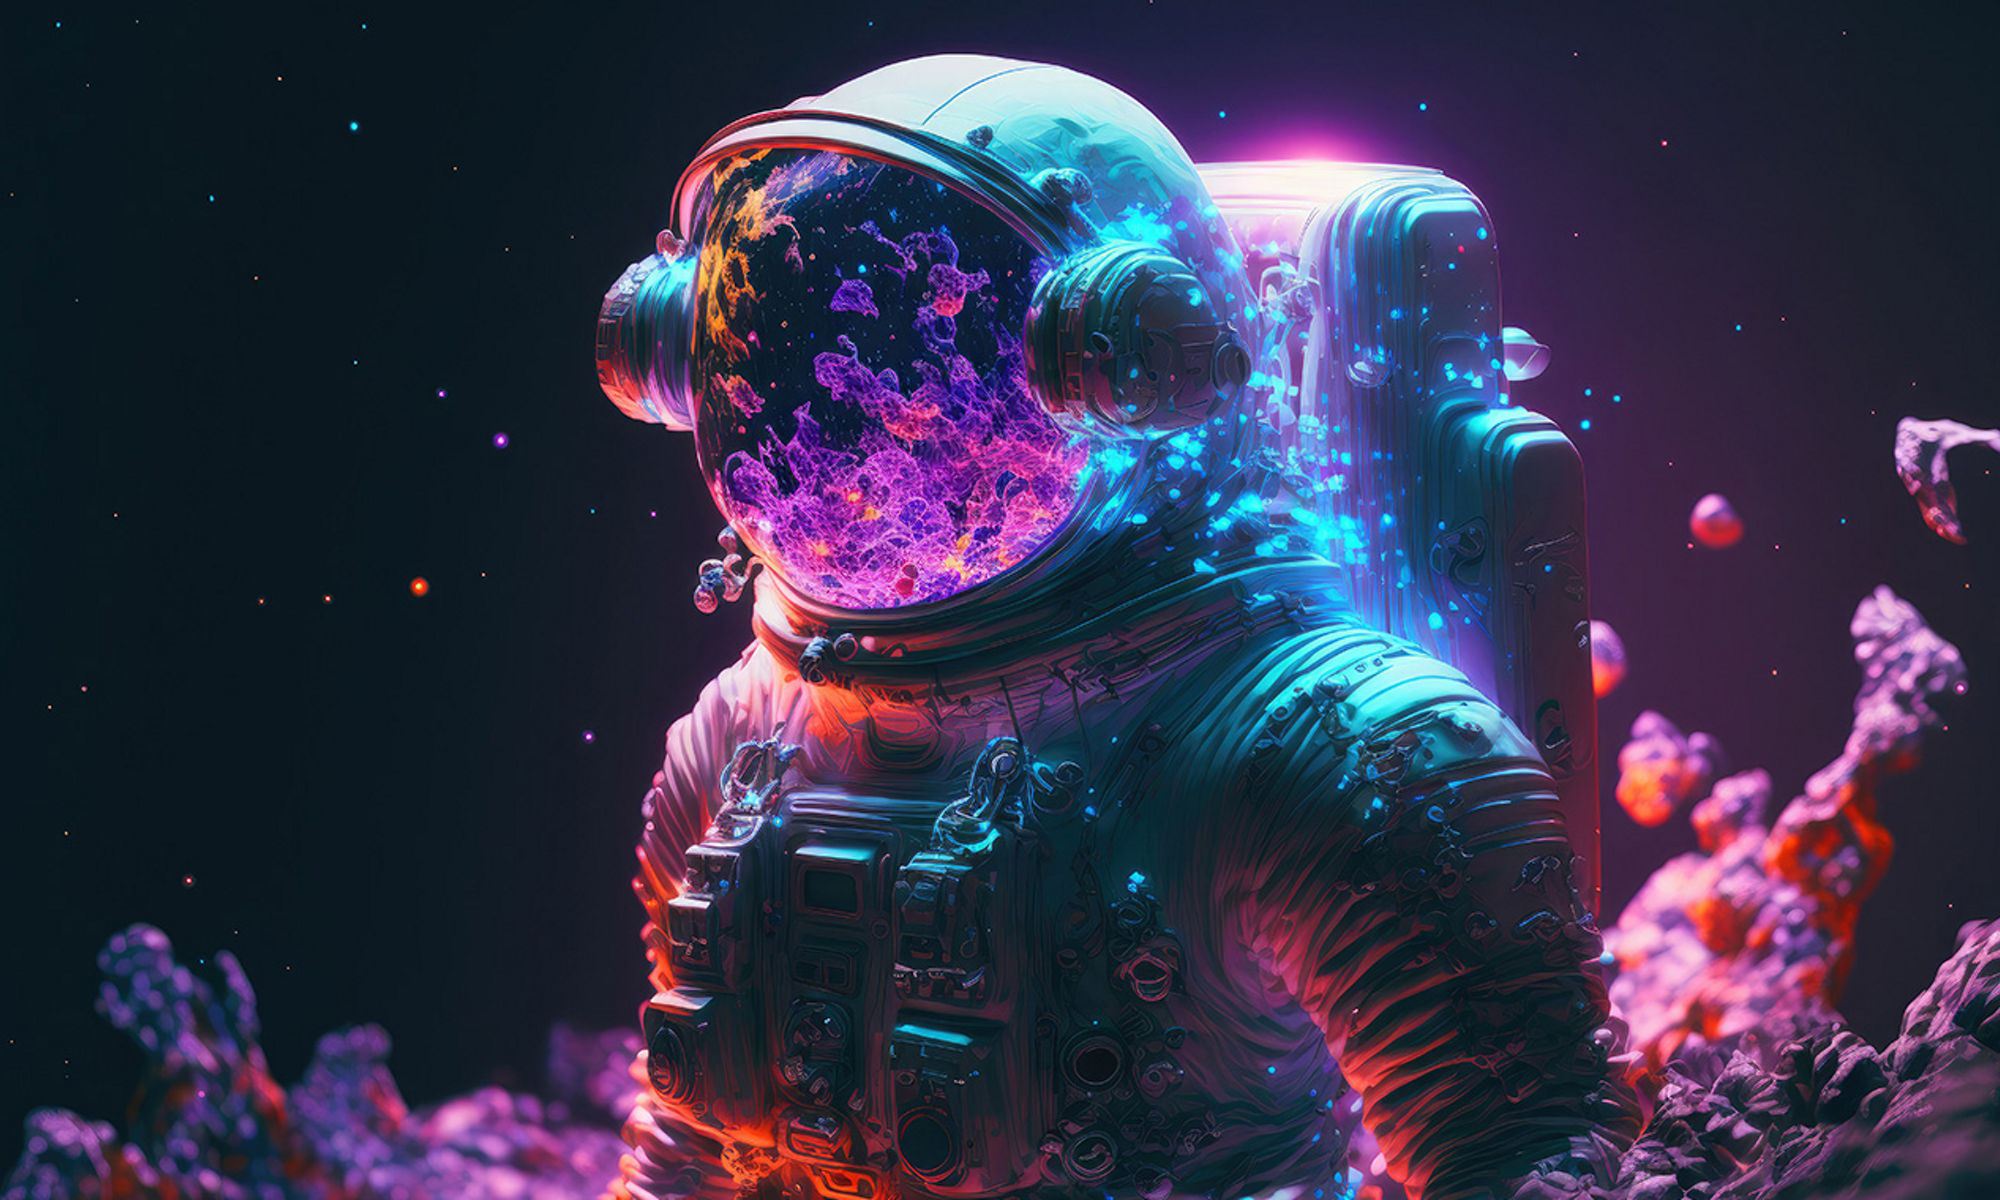 3D illustration of an astronaut made of crystals